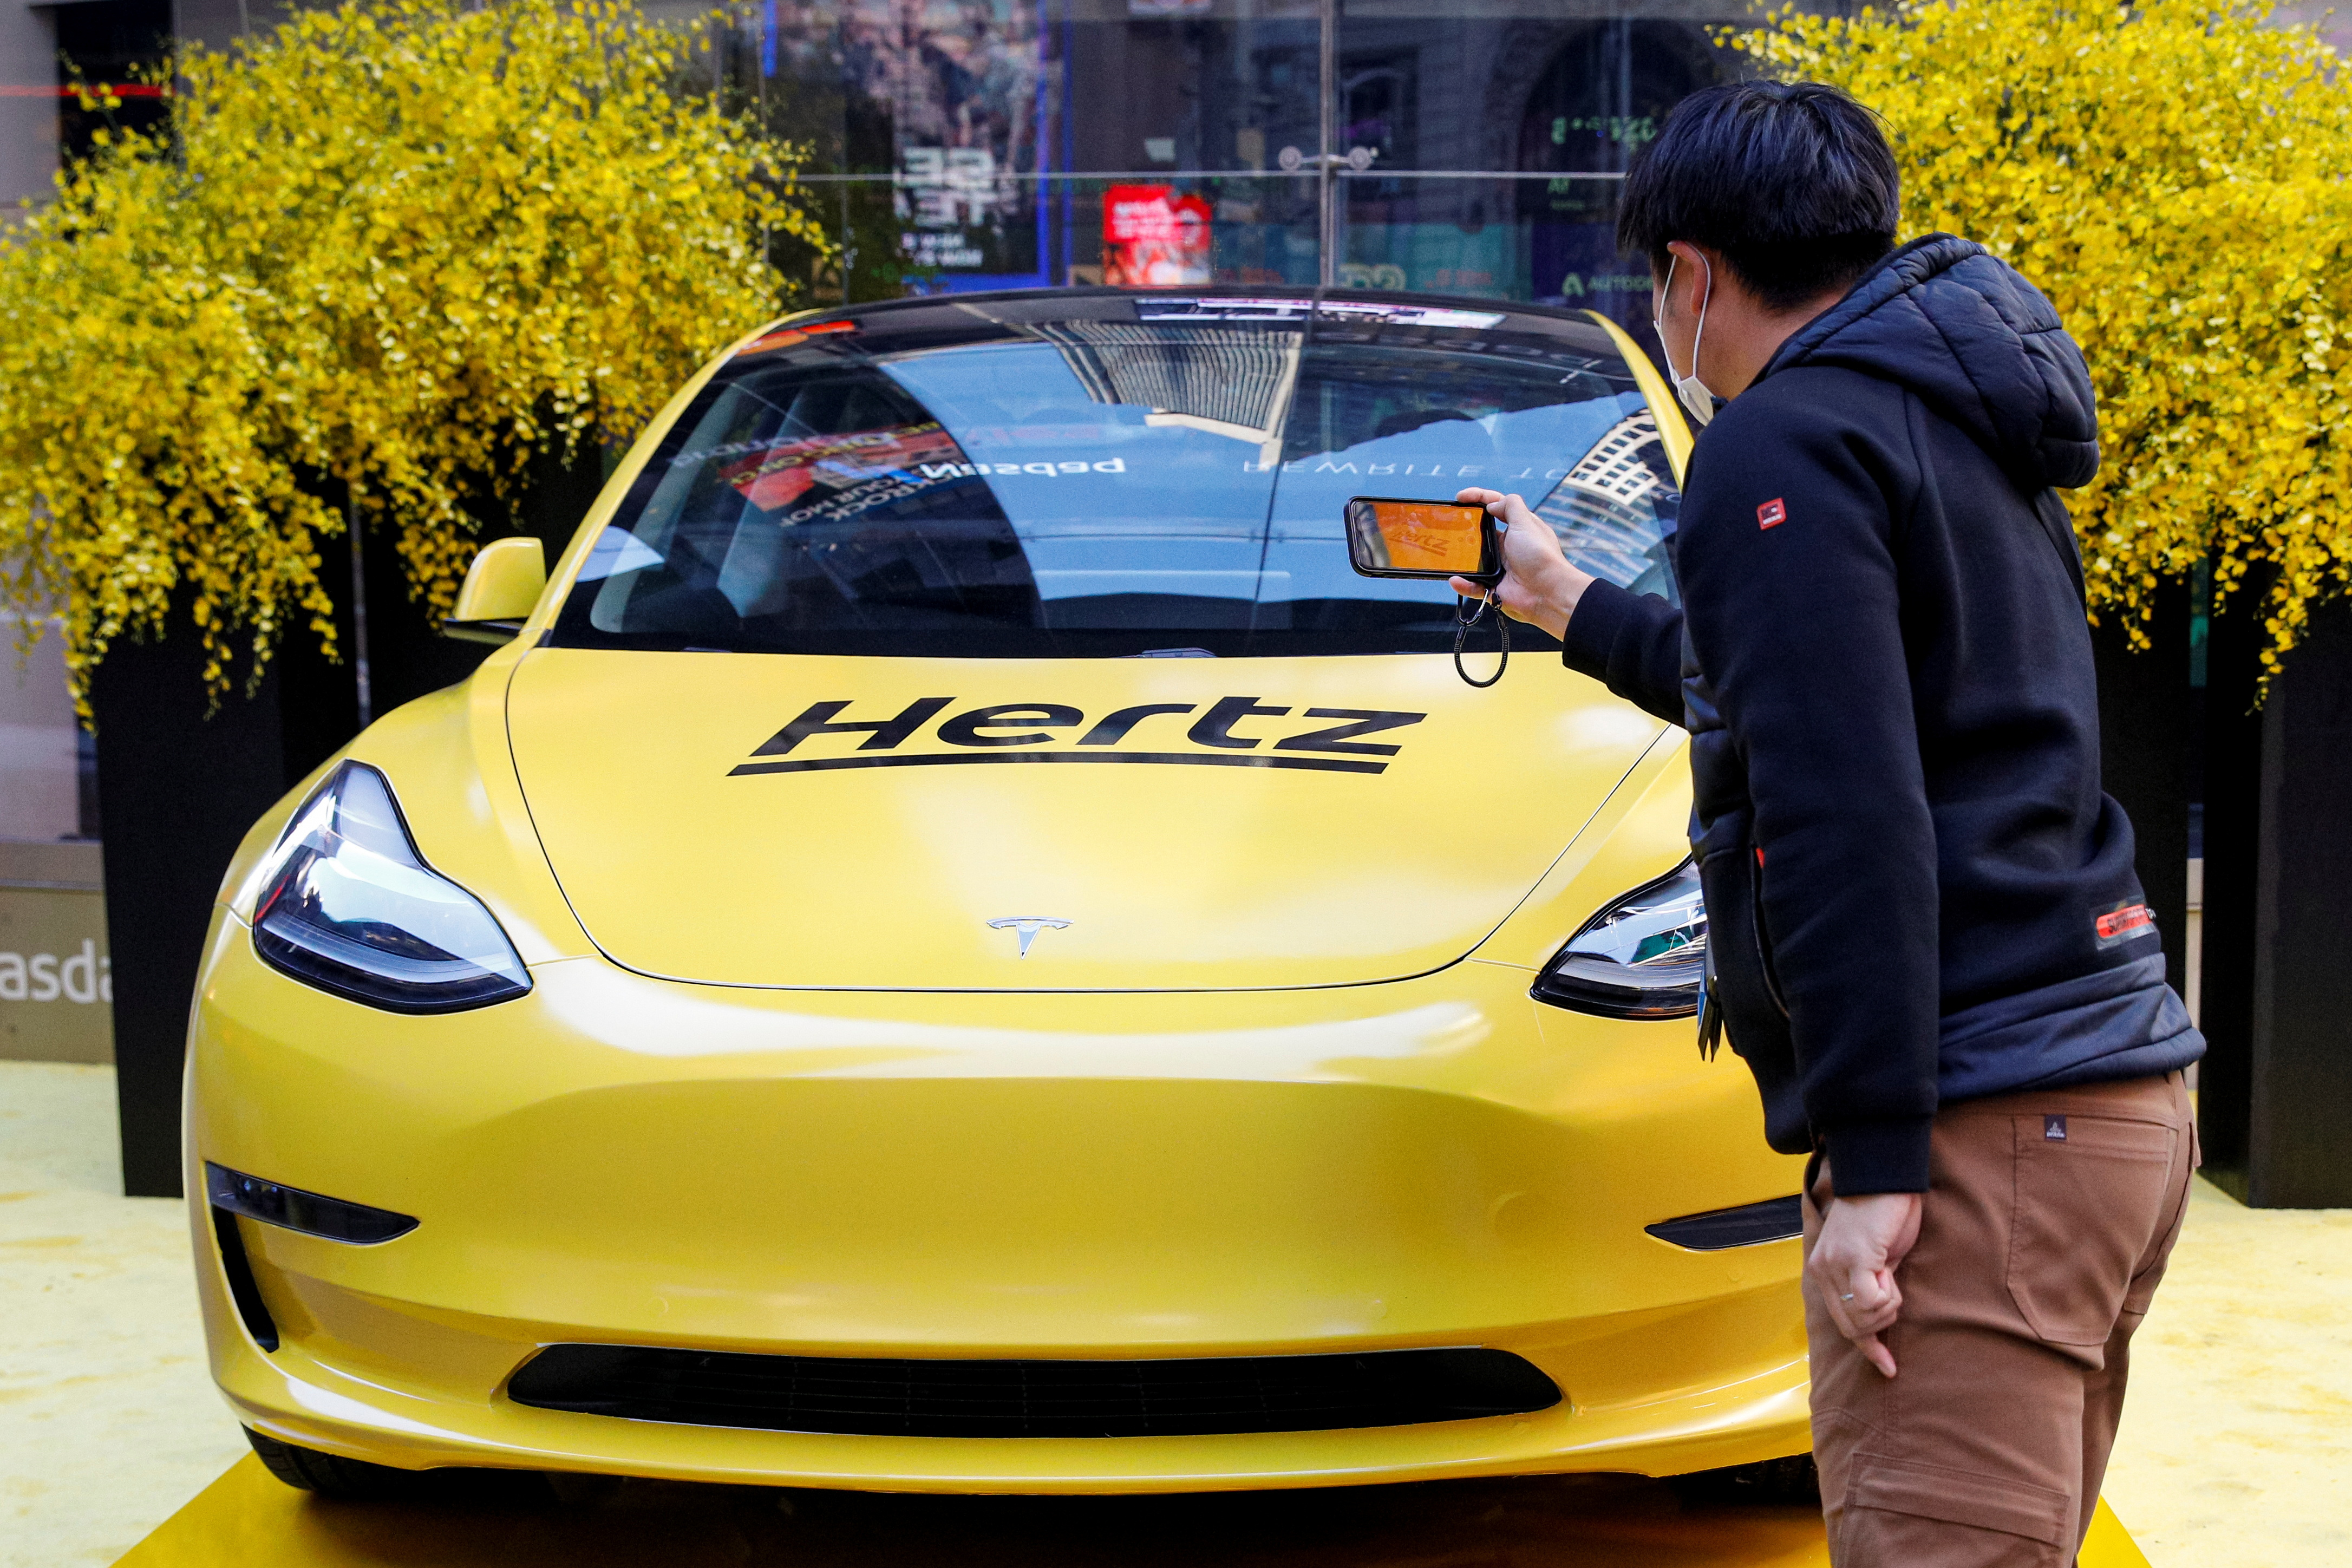 A man photographs a Hertz Tesla electric vehicle displayed during the Hertz Corporation IPO at the Nasdaq in New York